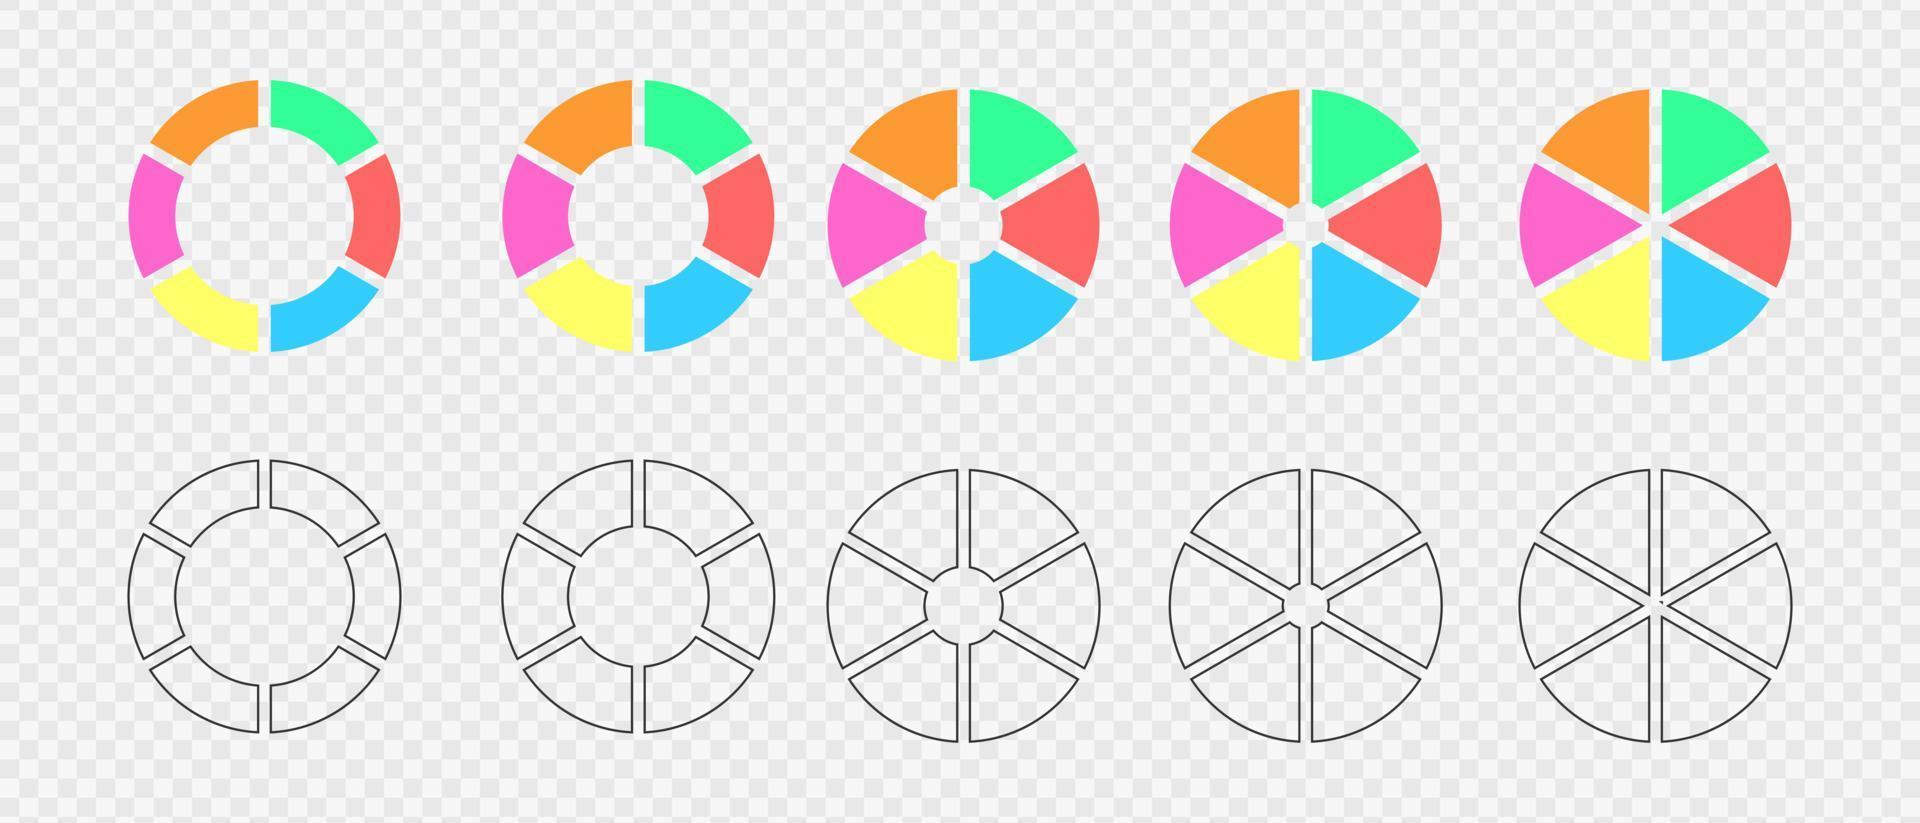 Set of donut charts segmented on 6 equal parts. Infographic wheels divided in six colored and graphic sections. Circle diagrams or loading bars vector